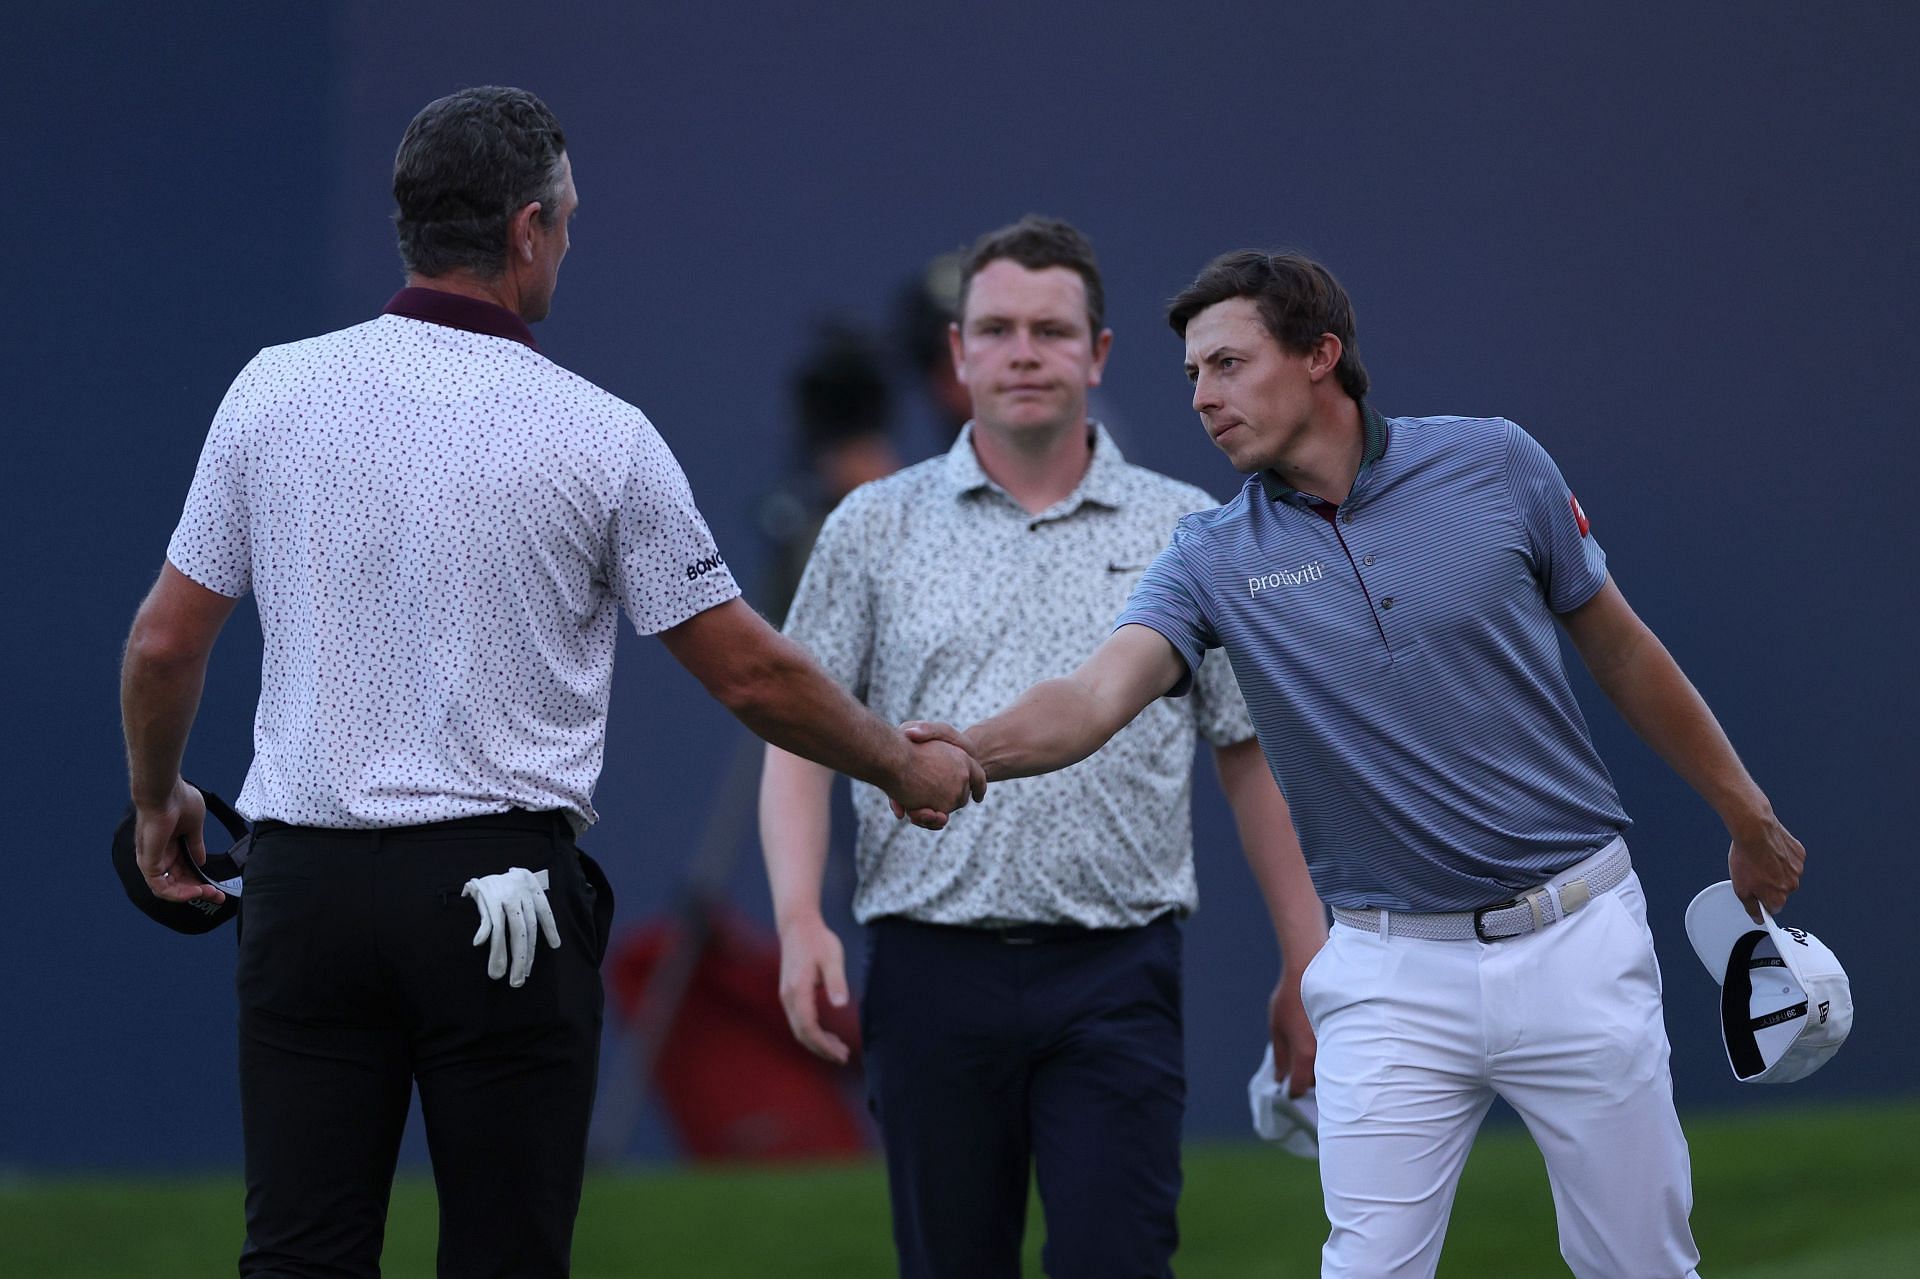 Matt Fitzpatrick shakes hands with Justin Rose after the first round of the BMW PGA Championship